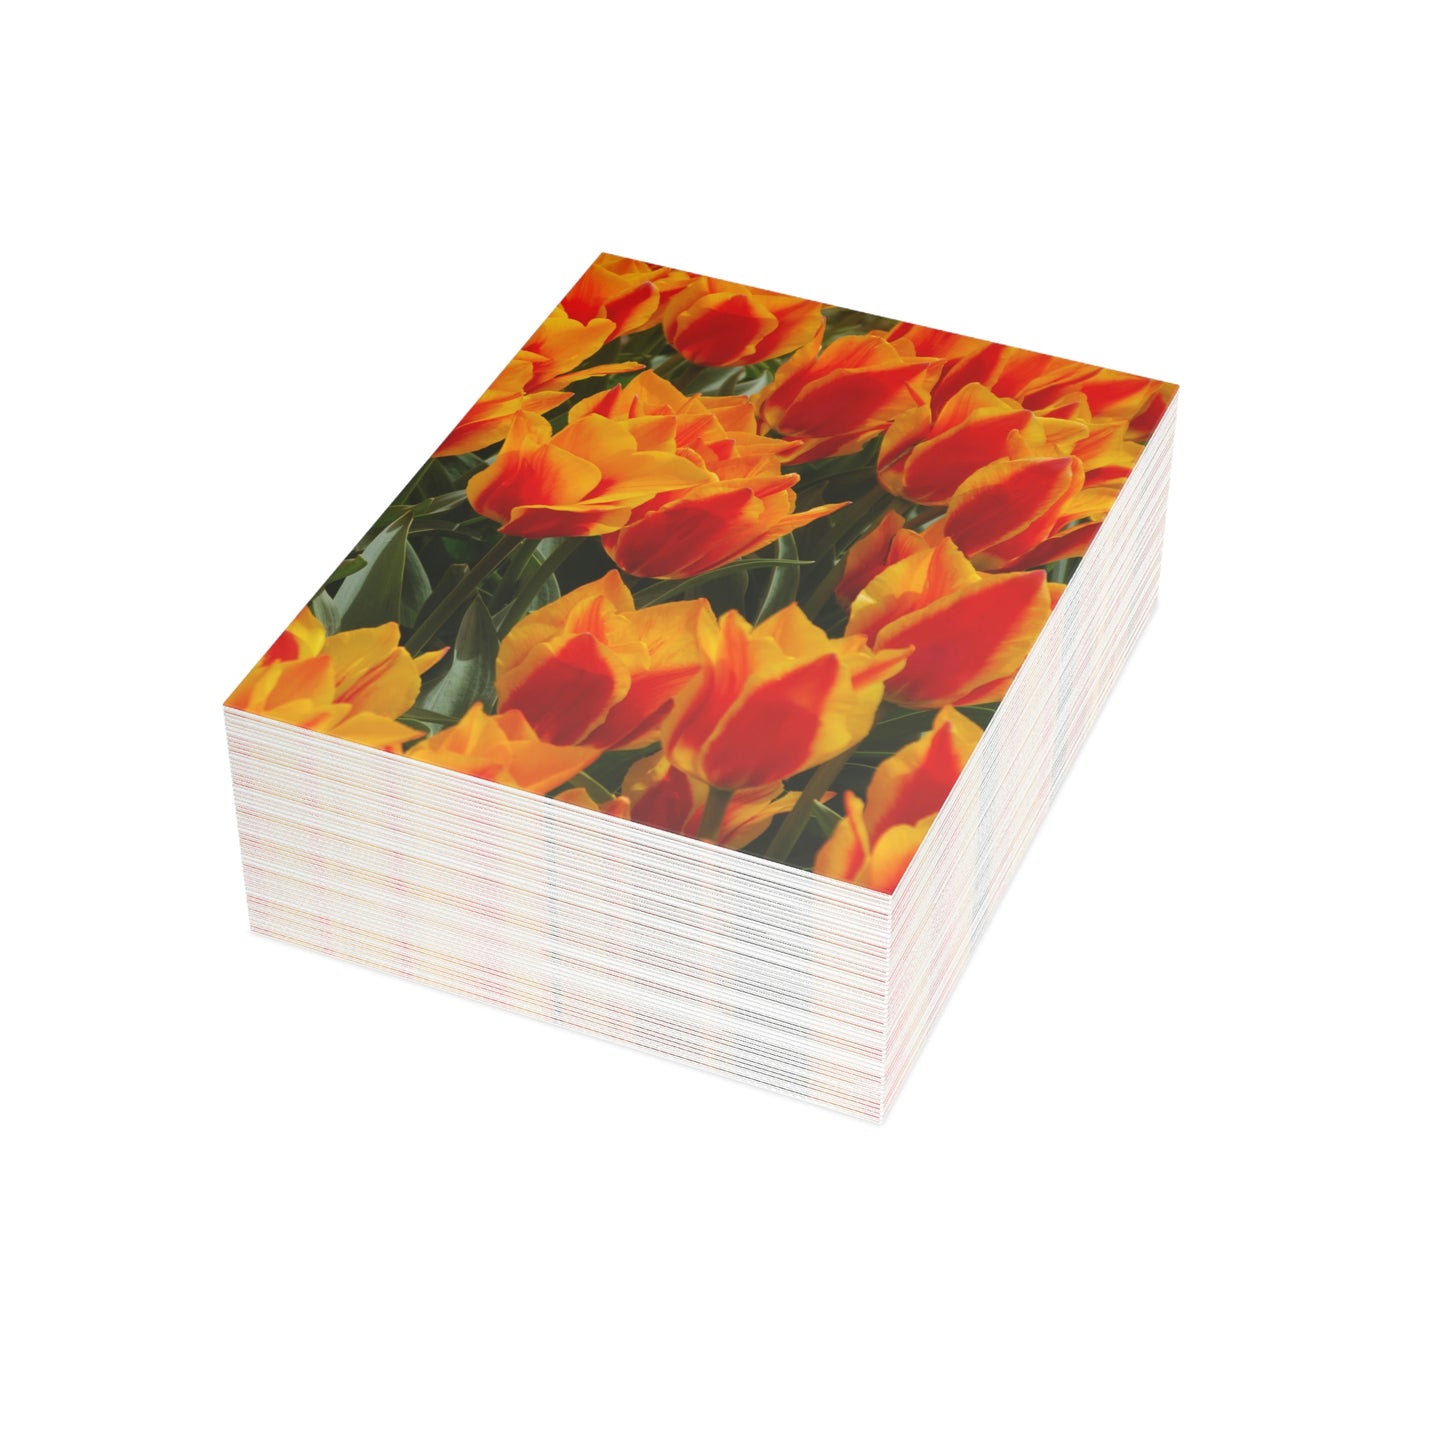 Flowers 18 Greeting Cards (1, 10, 30, and 50pcs)